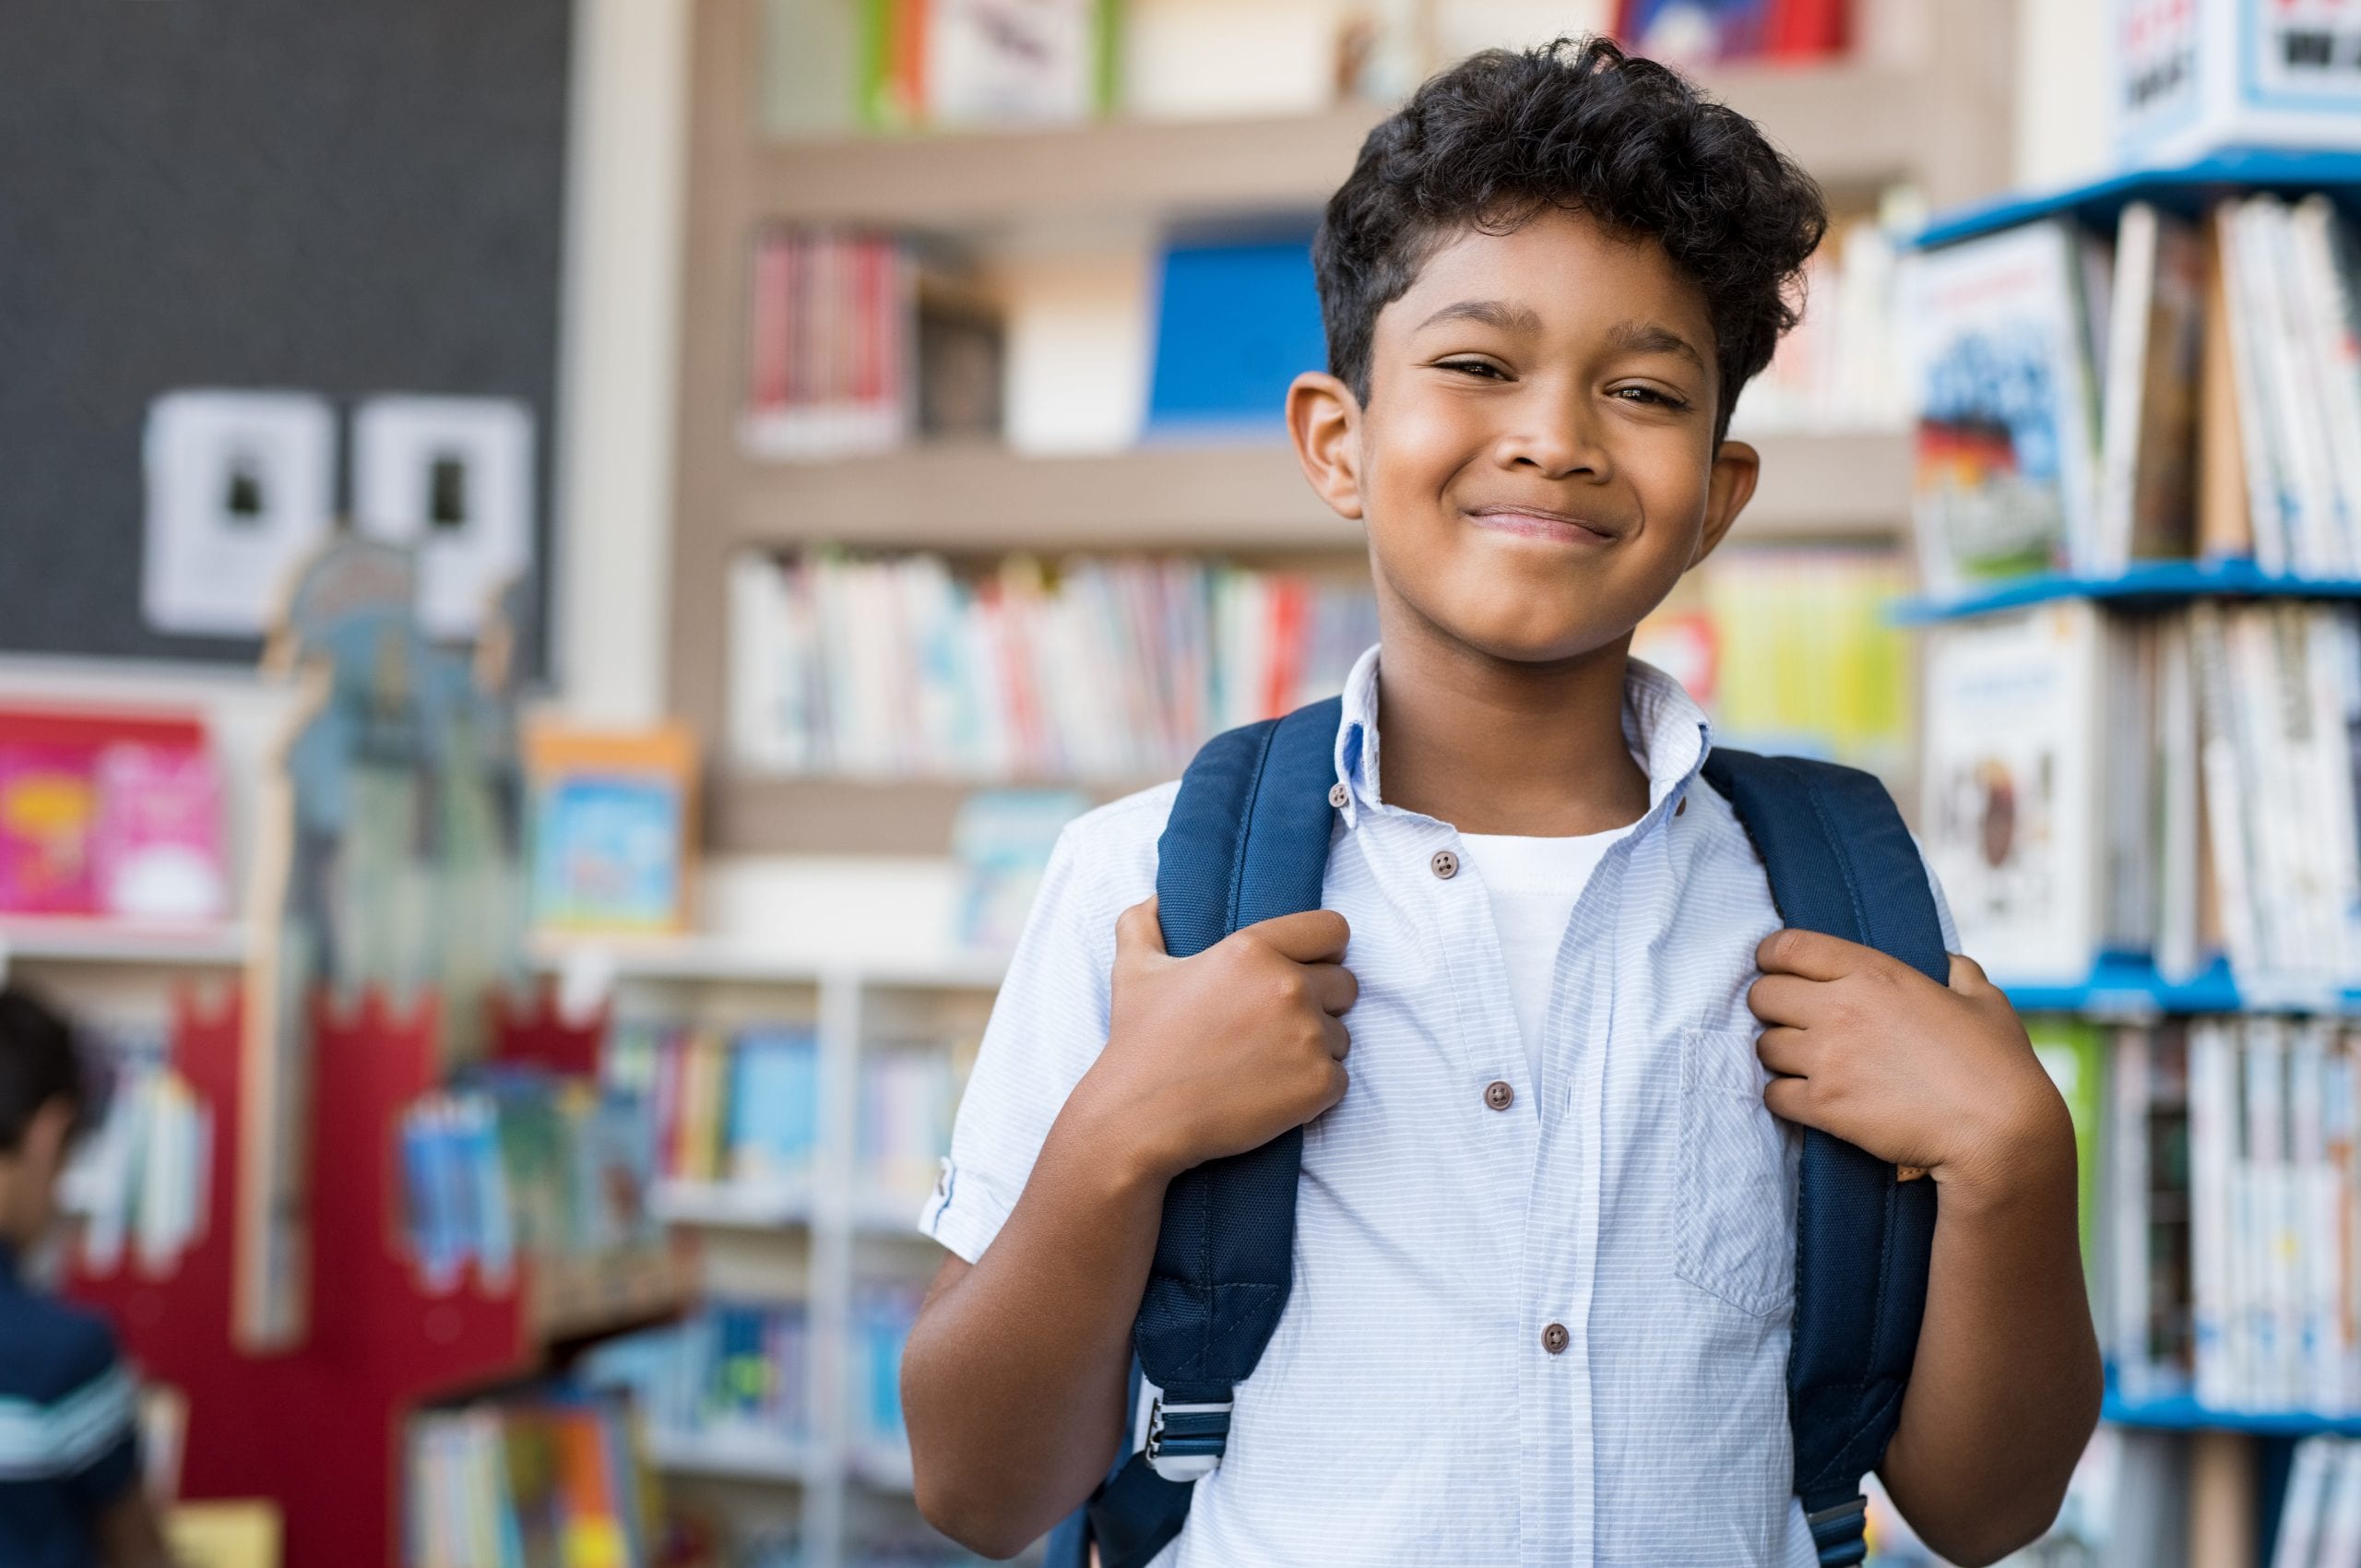 Young hispanic boy smiling with backpack on